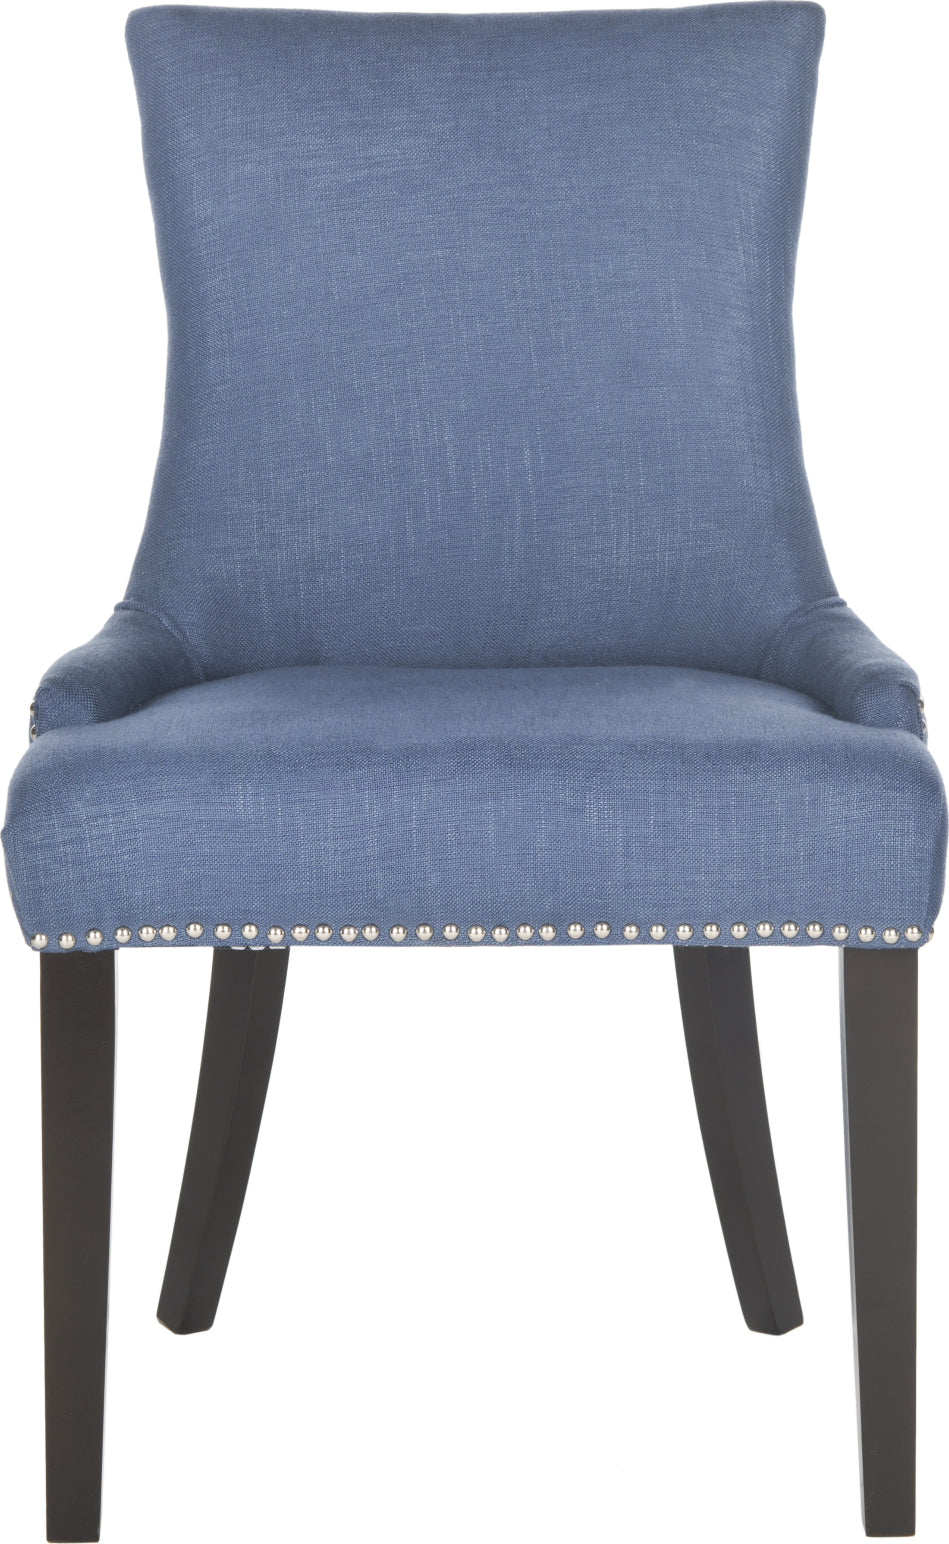 Safavieh Lester 19''H Dining Chair-Silver Nail Heads Blue and Espresso Furniture main image